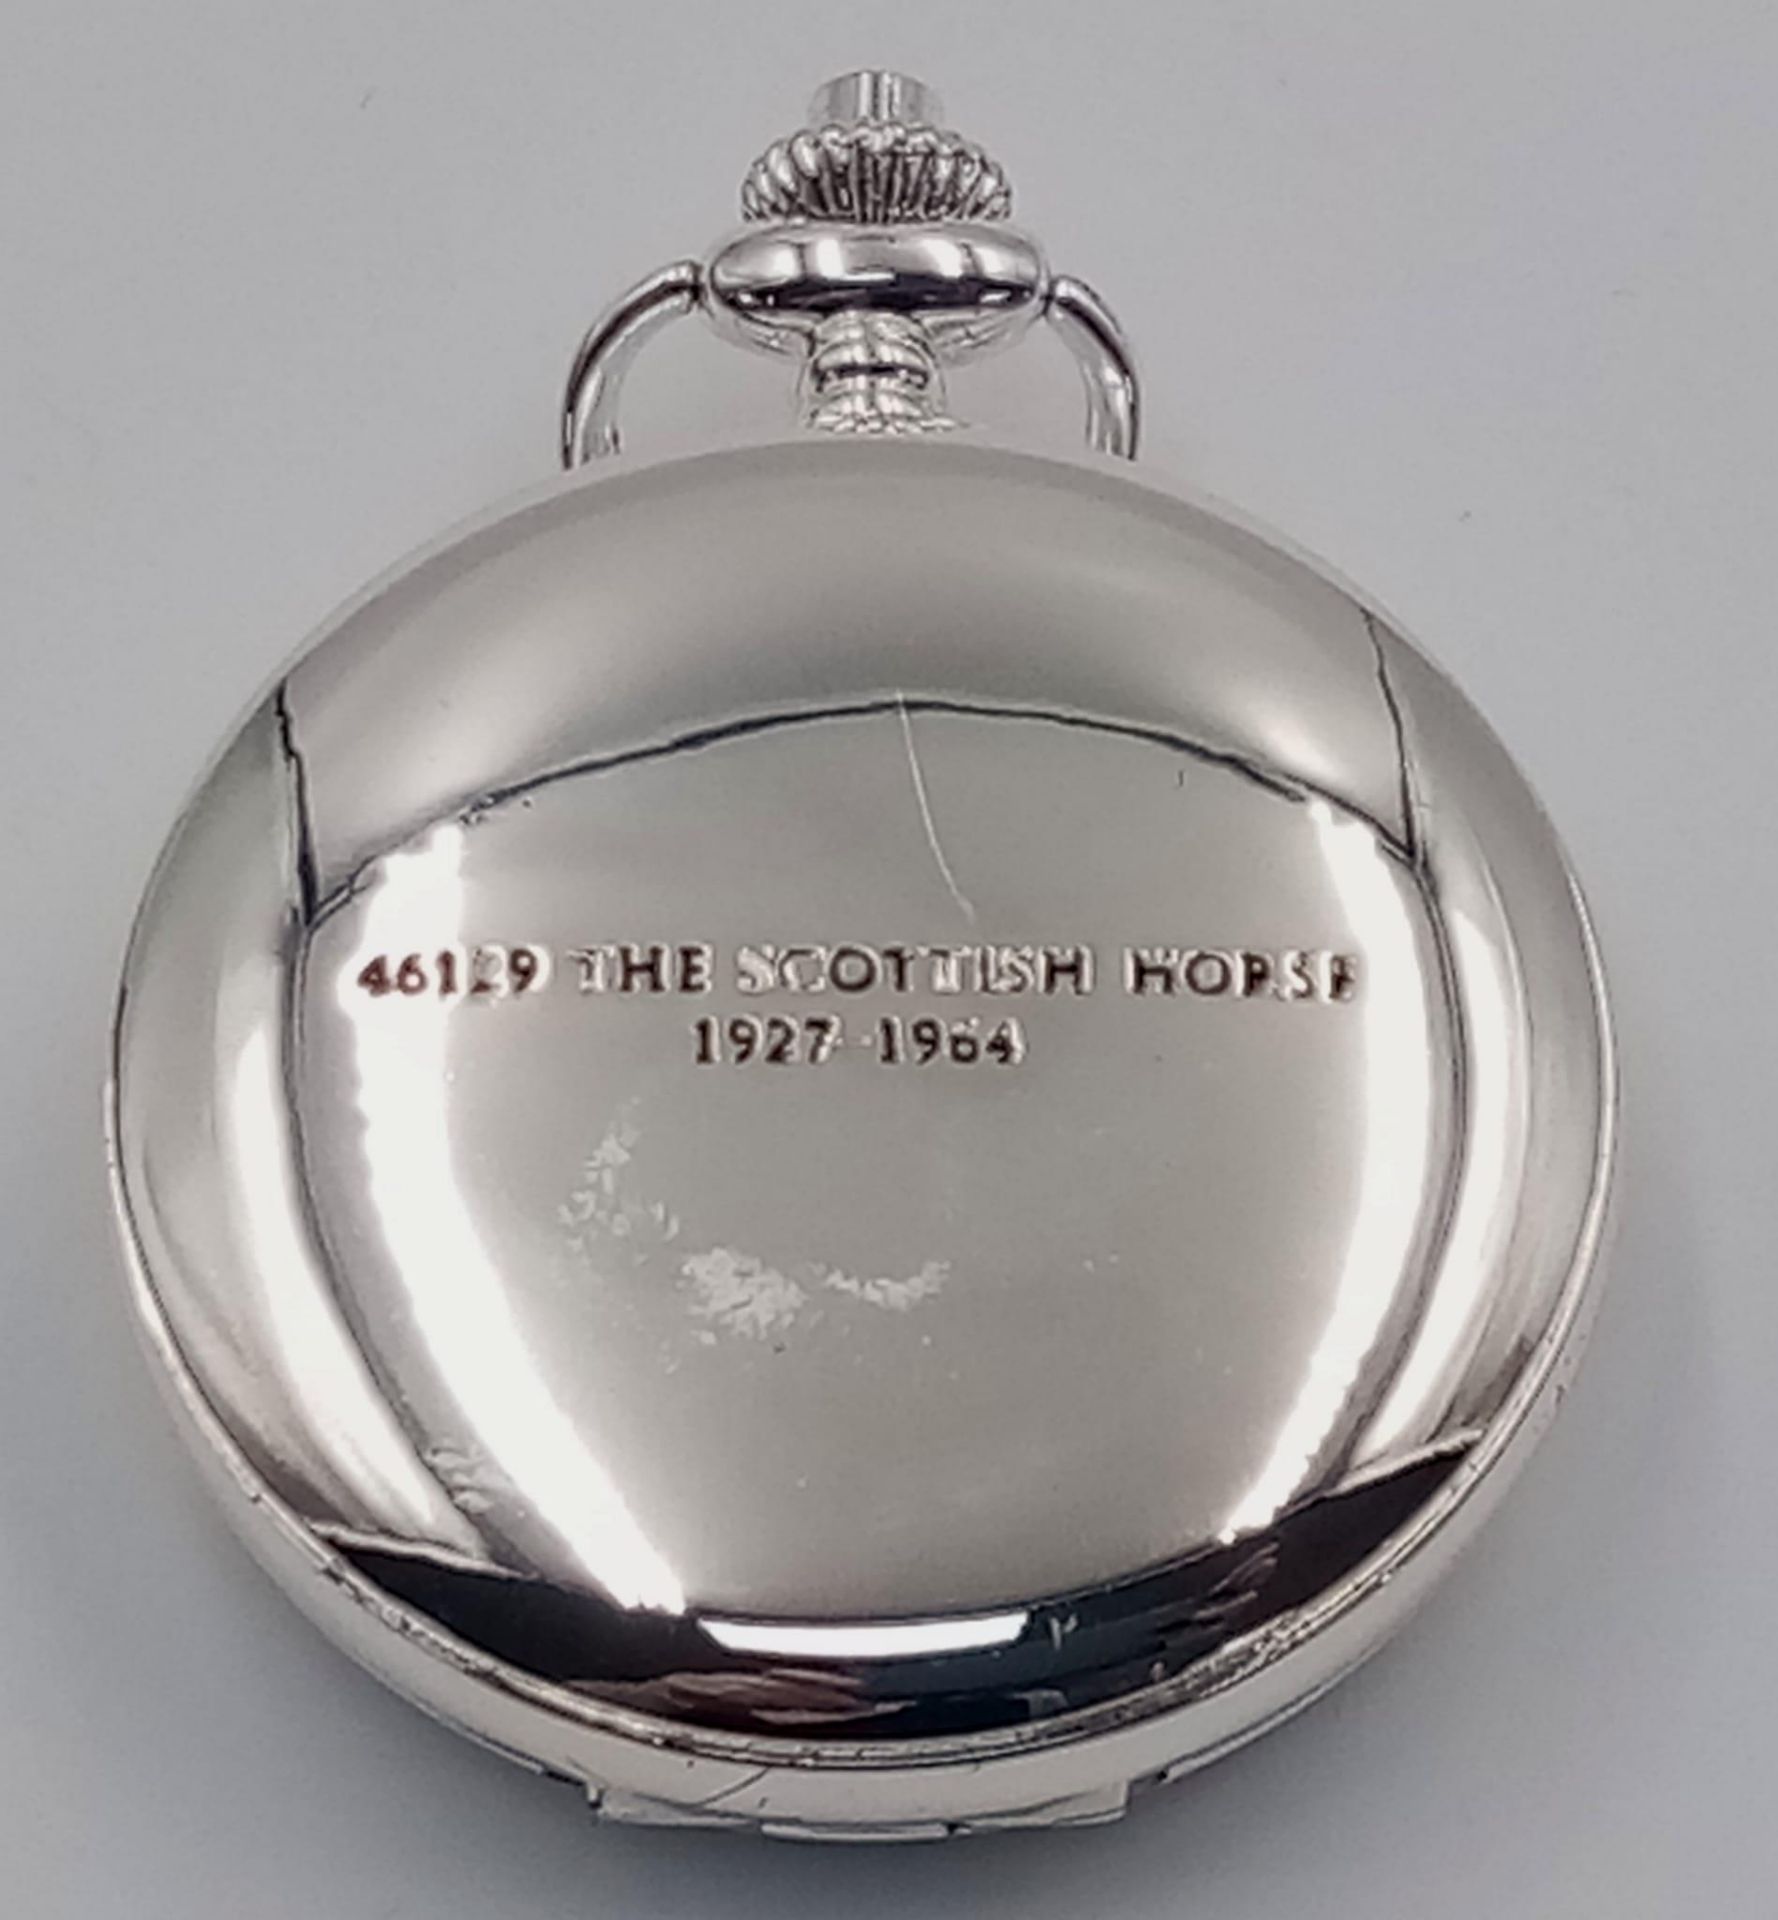 A Manual Wind Silver Plated Pocket Watch Detailing the Steam Train ‘The Scottish Horse-1927-1964’, - Bild 2 aus 9